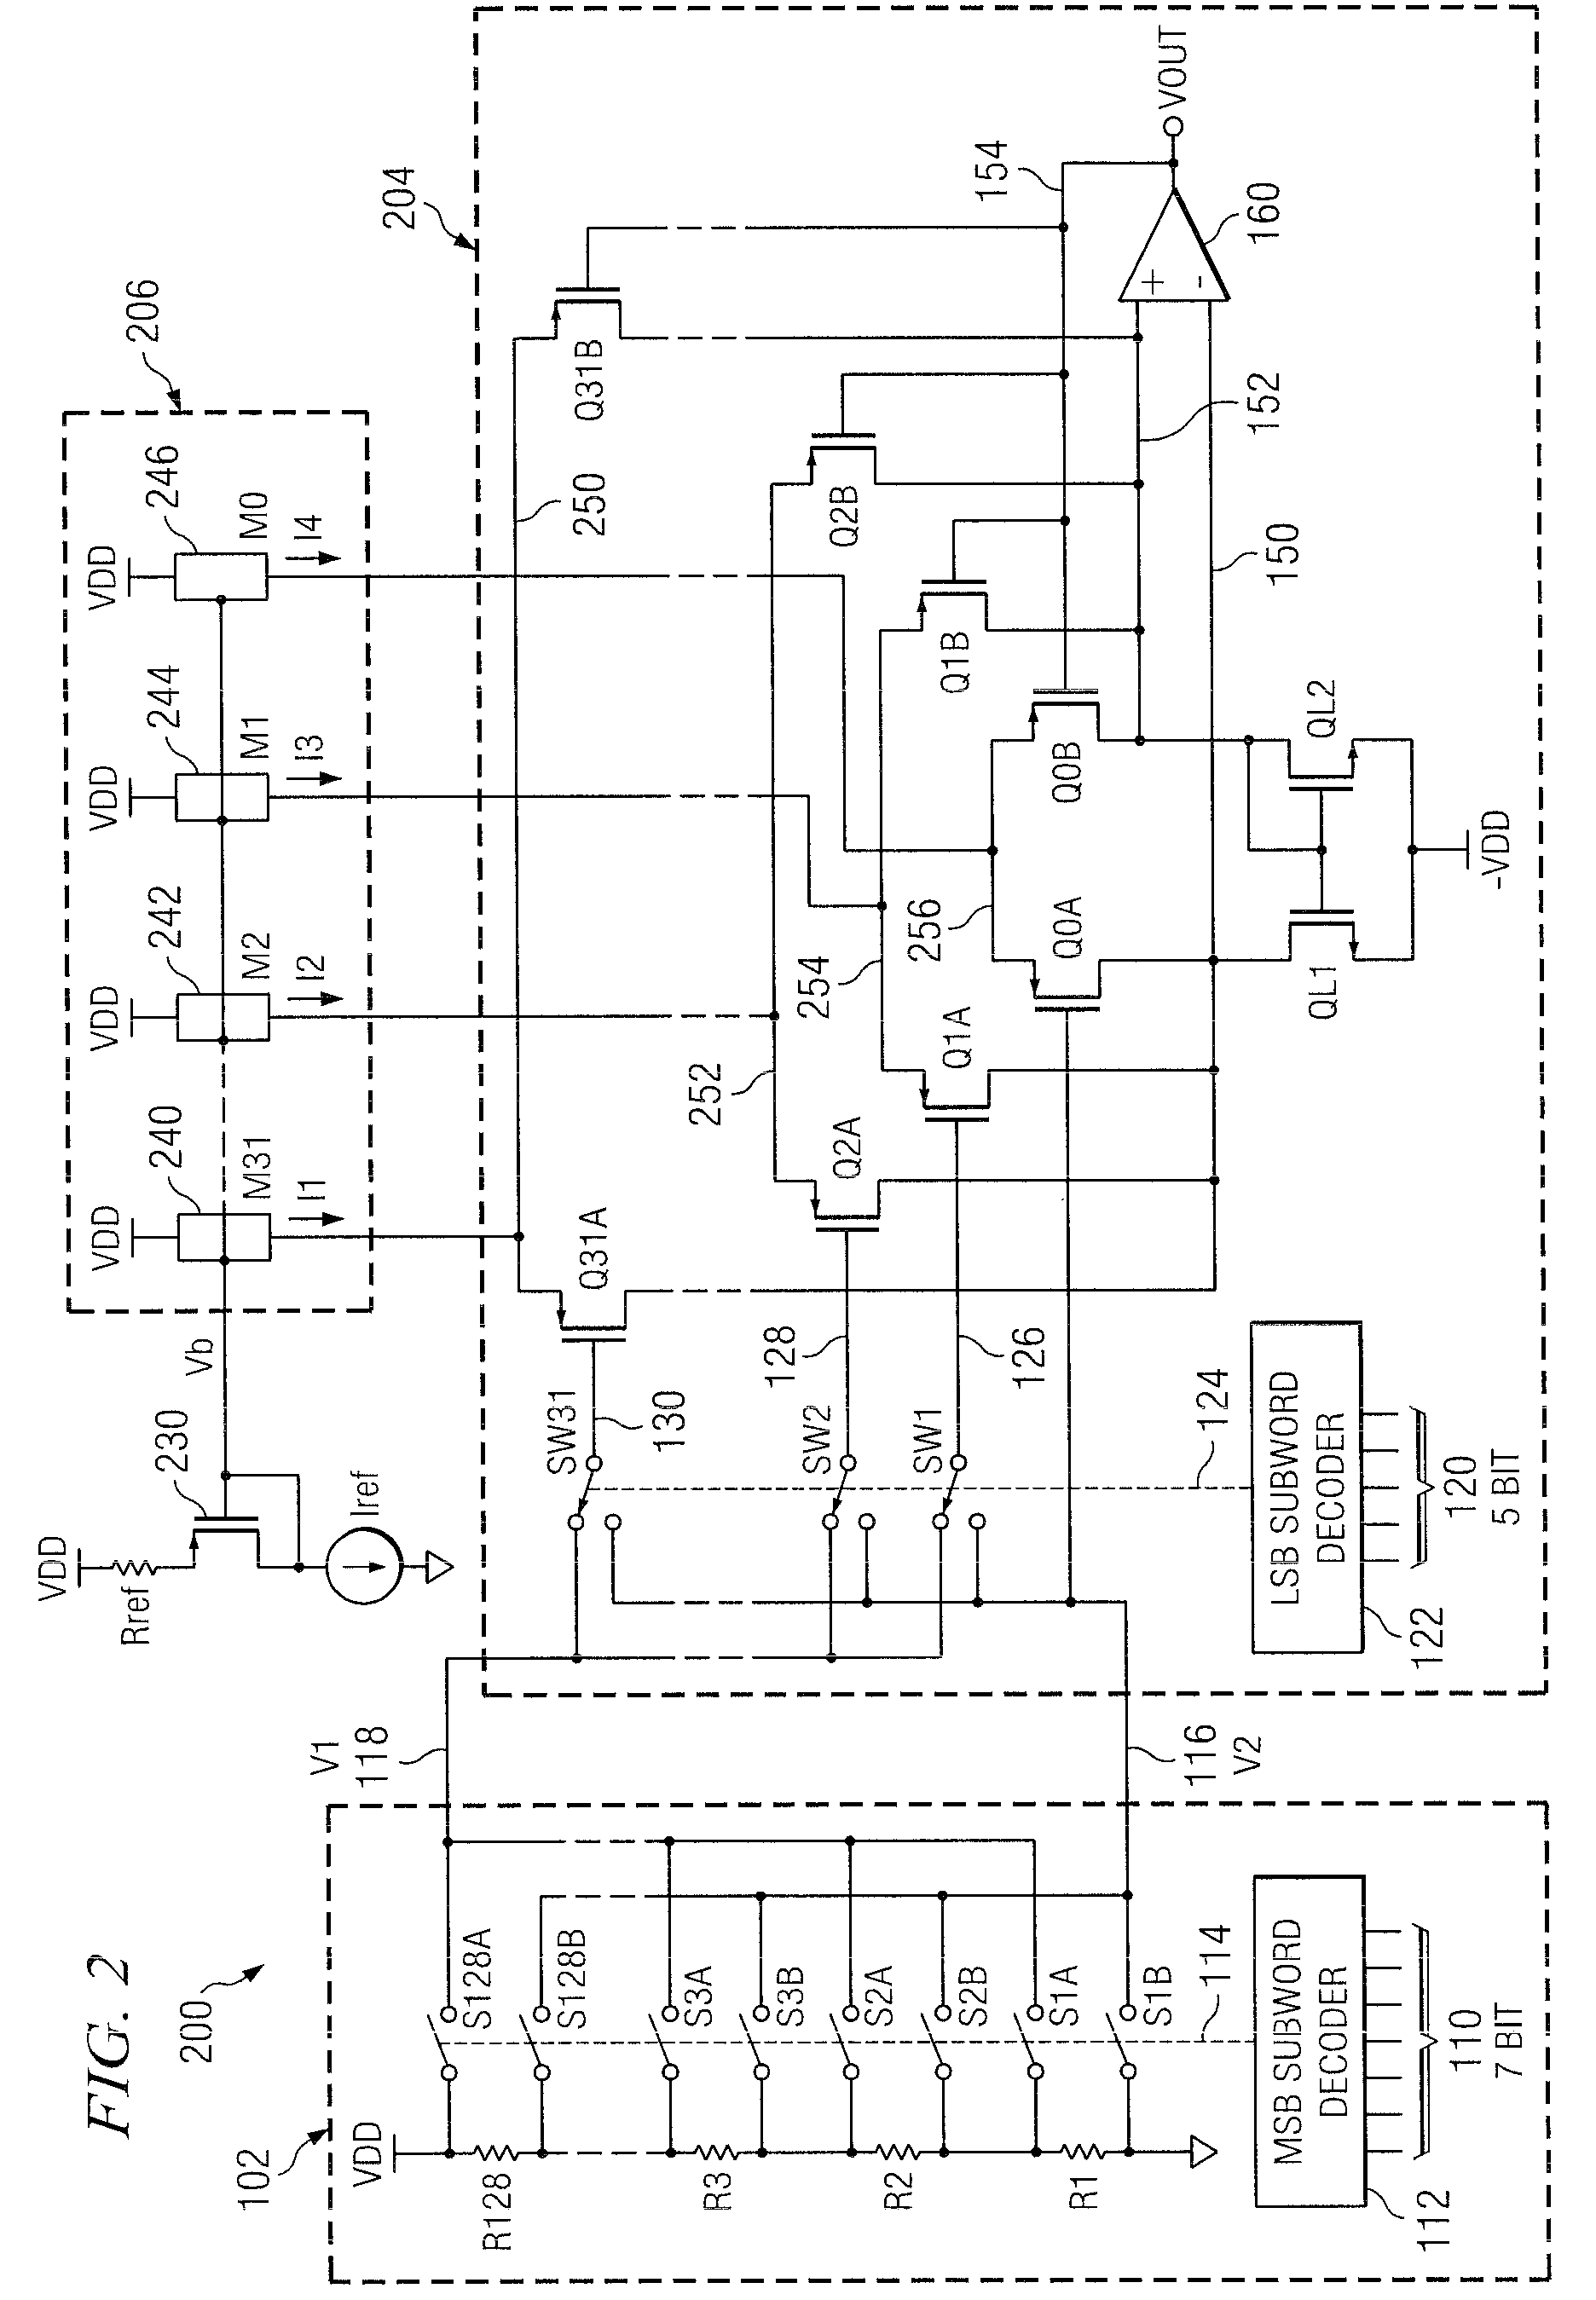 Circuits and methods to minimize nonlinearity errors in interpolating circuits